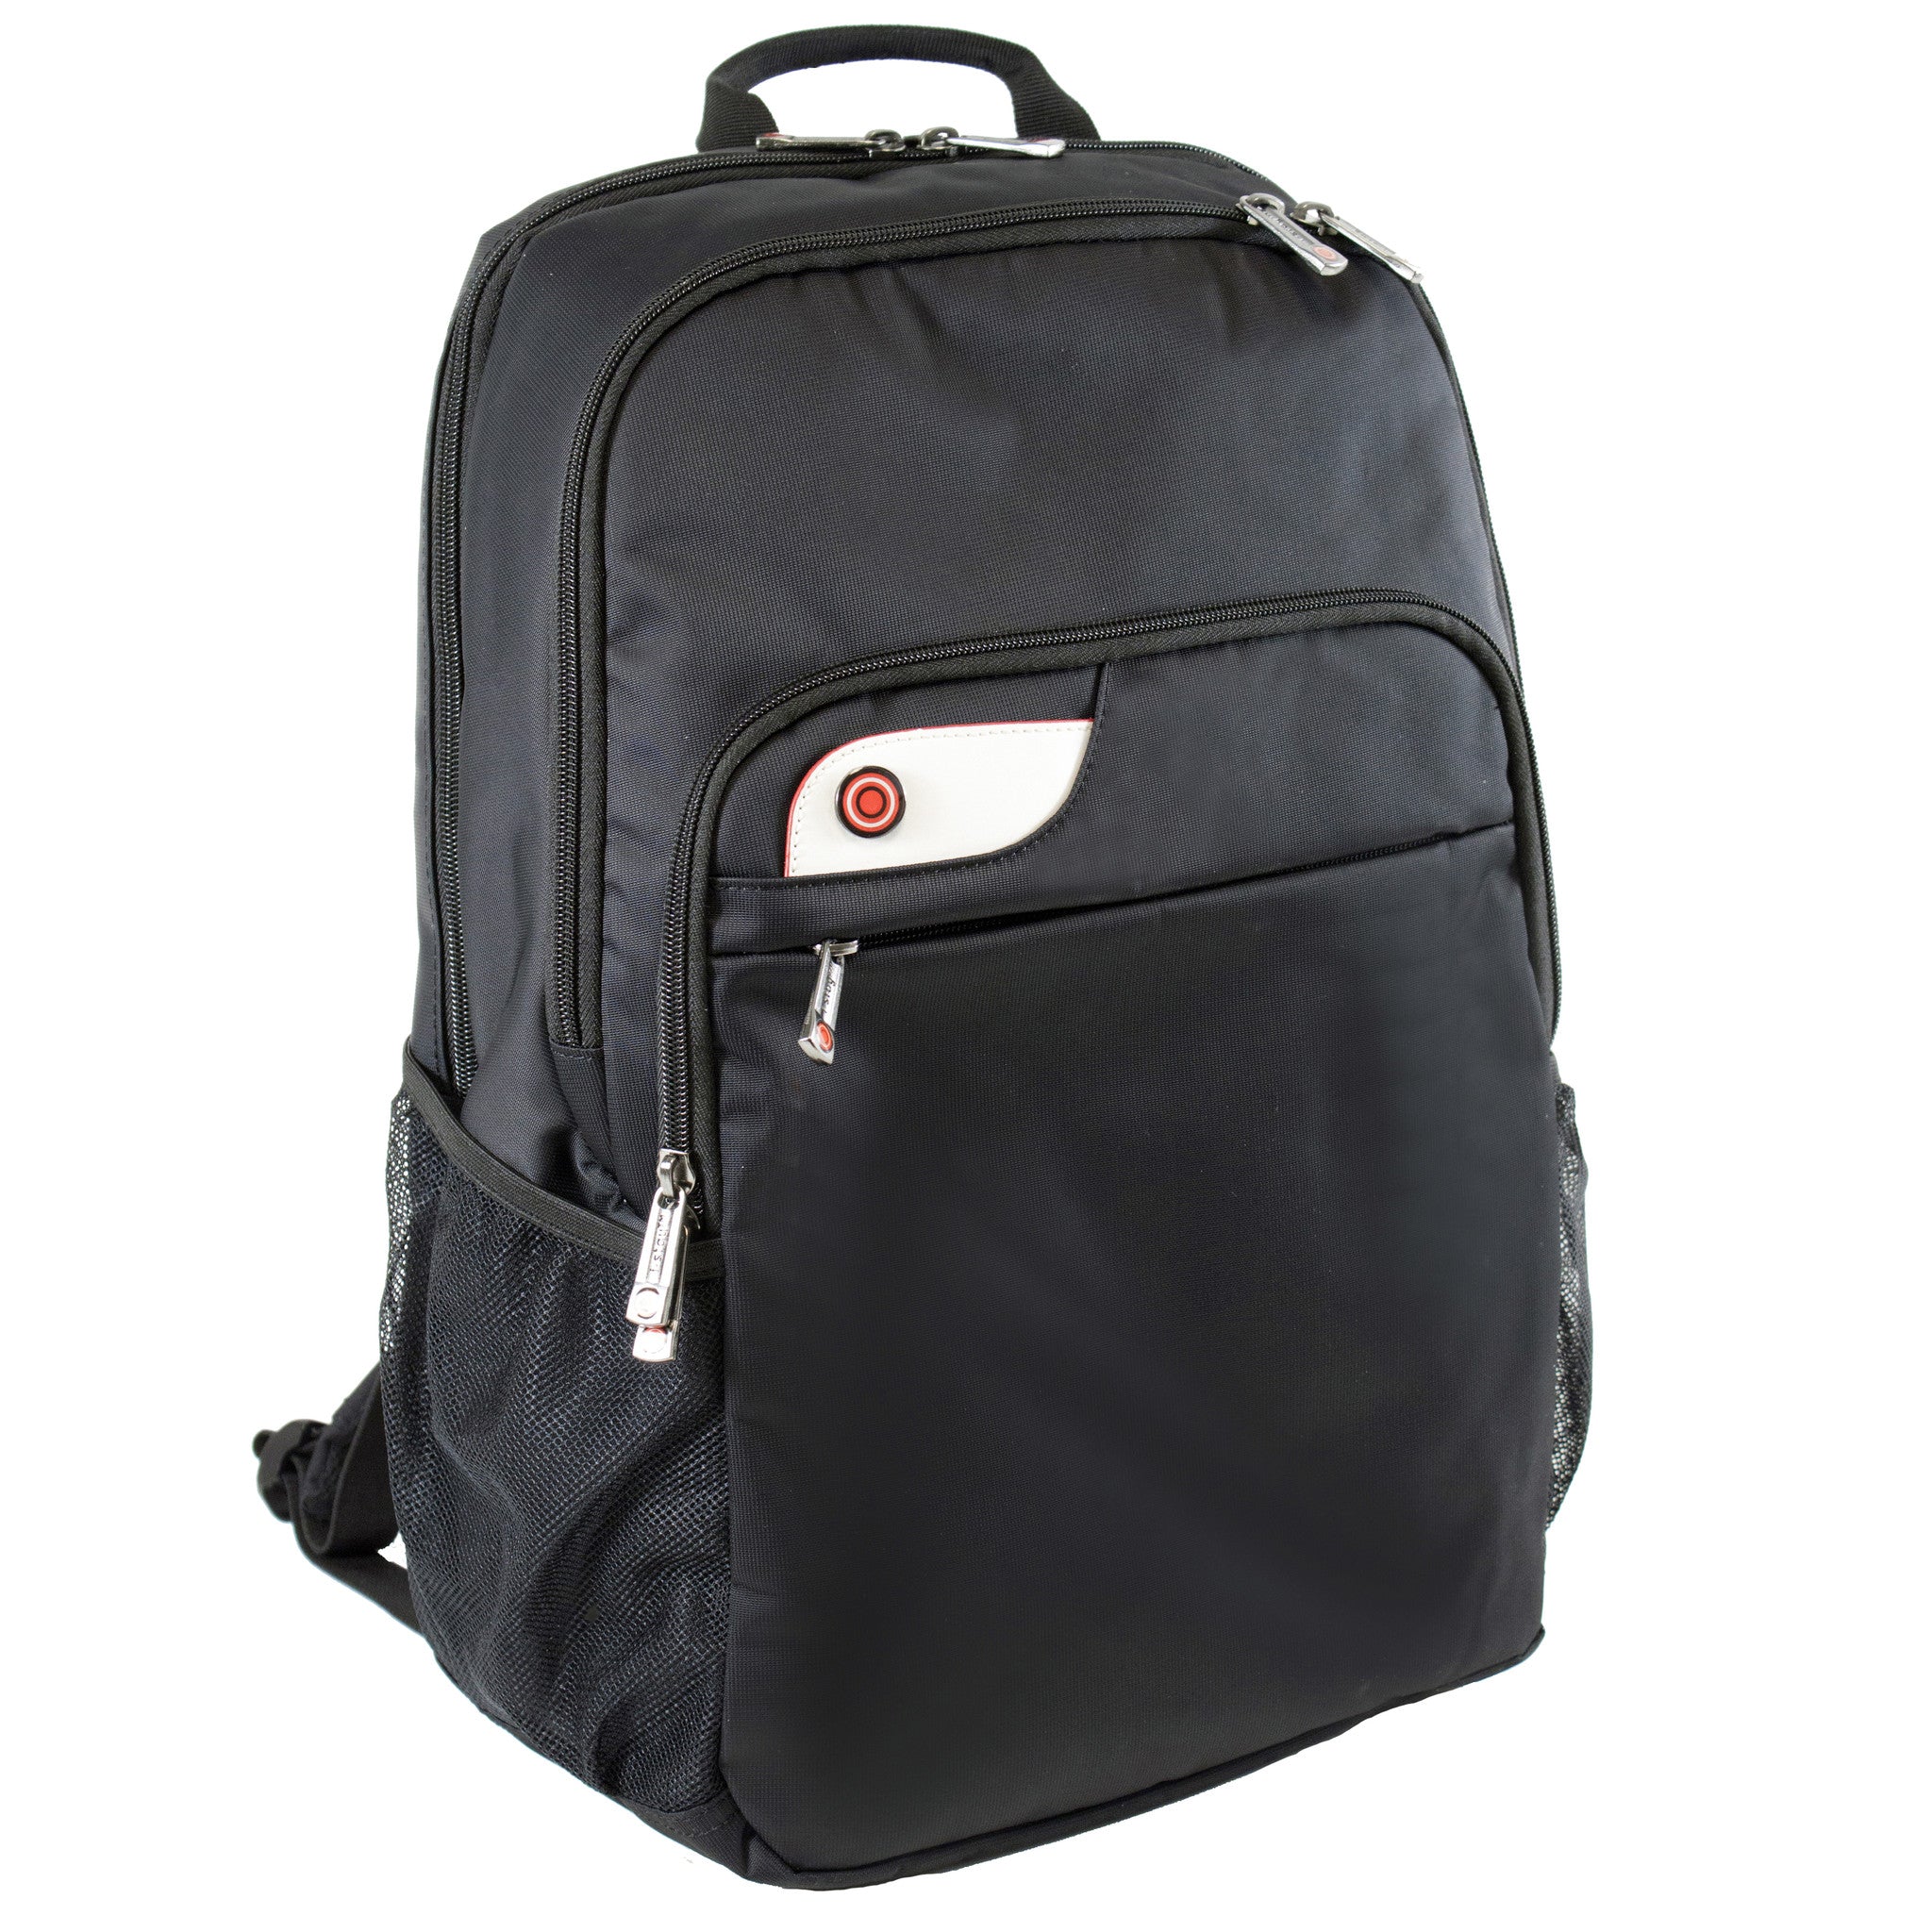 i-stay Launch Laptop Backpack (is0105, 15.6